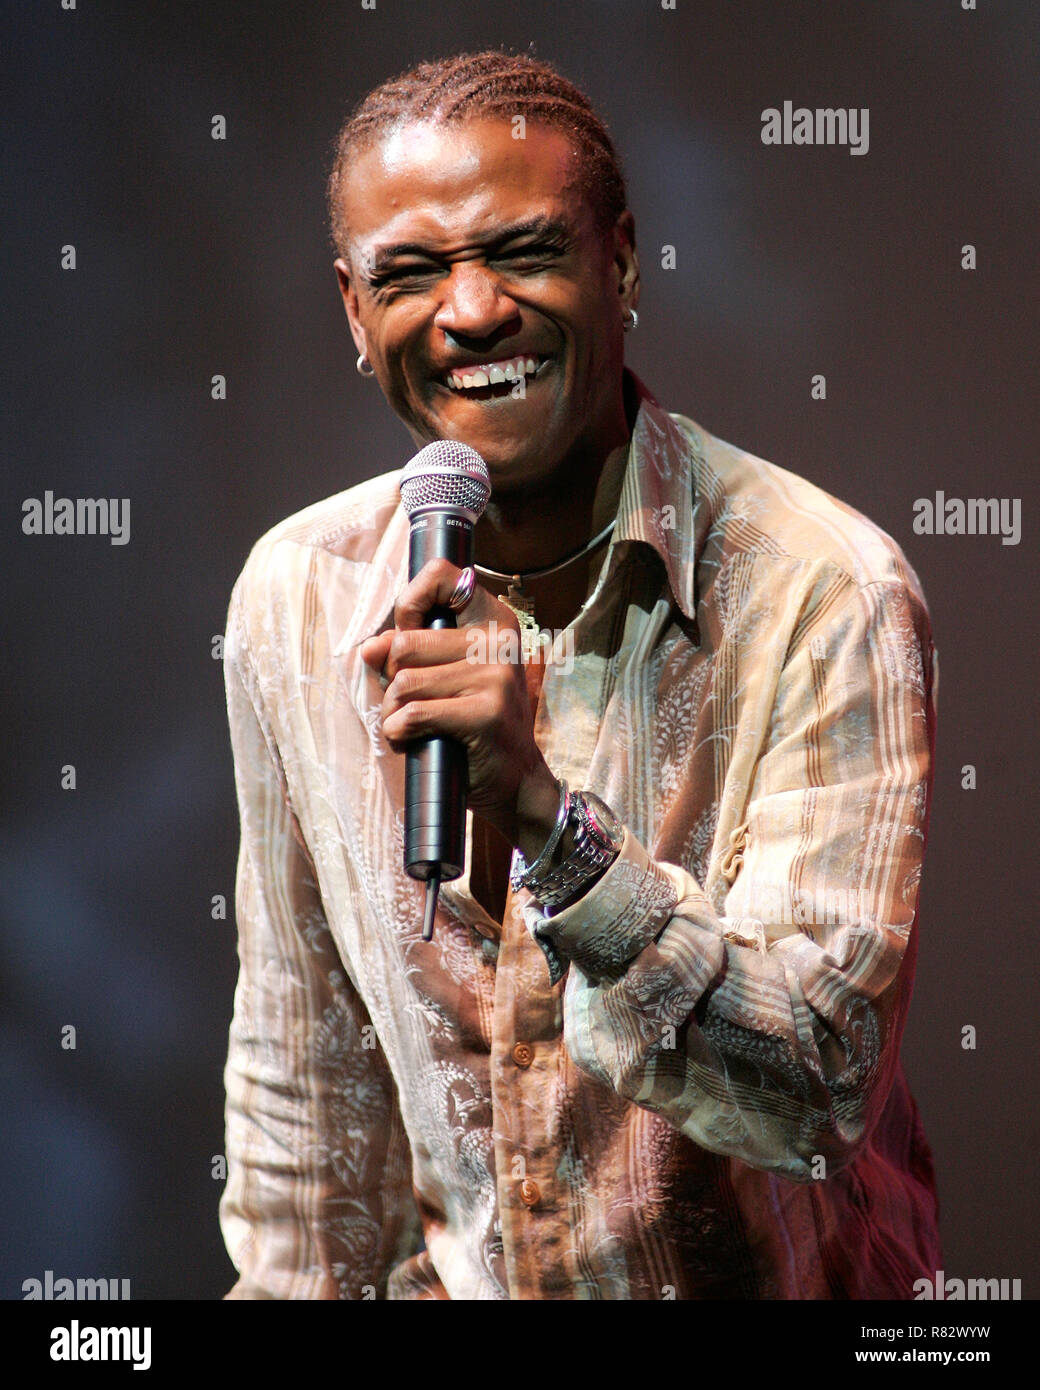 Tommy Davidson performs during an American Idol preview show at the Seminole Hard Rock Hotel and Casino in Hollywood, Florida on May 23, 2006 Stock Photo